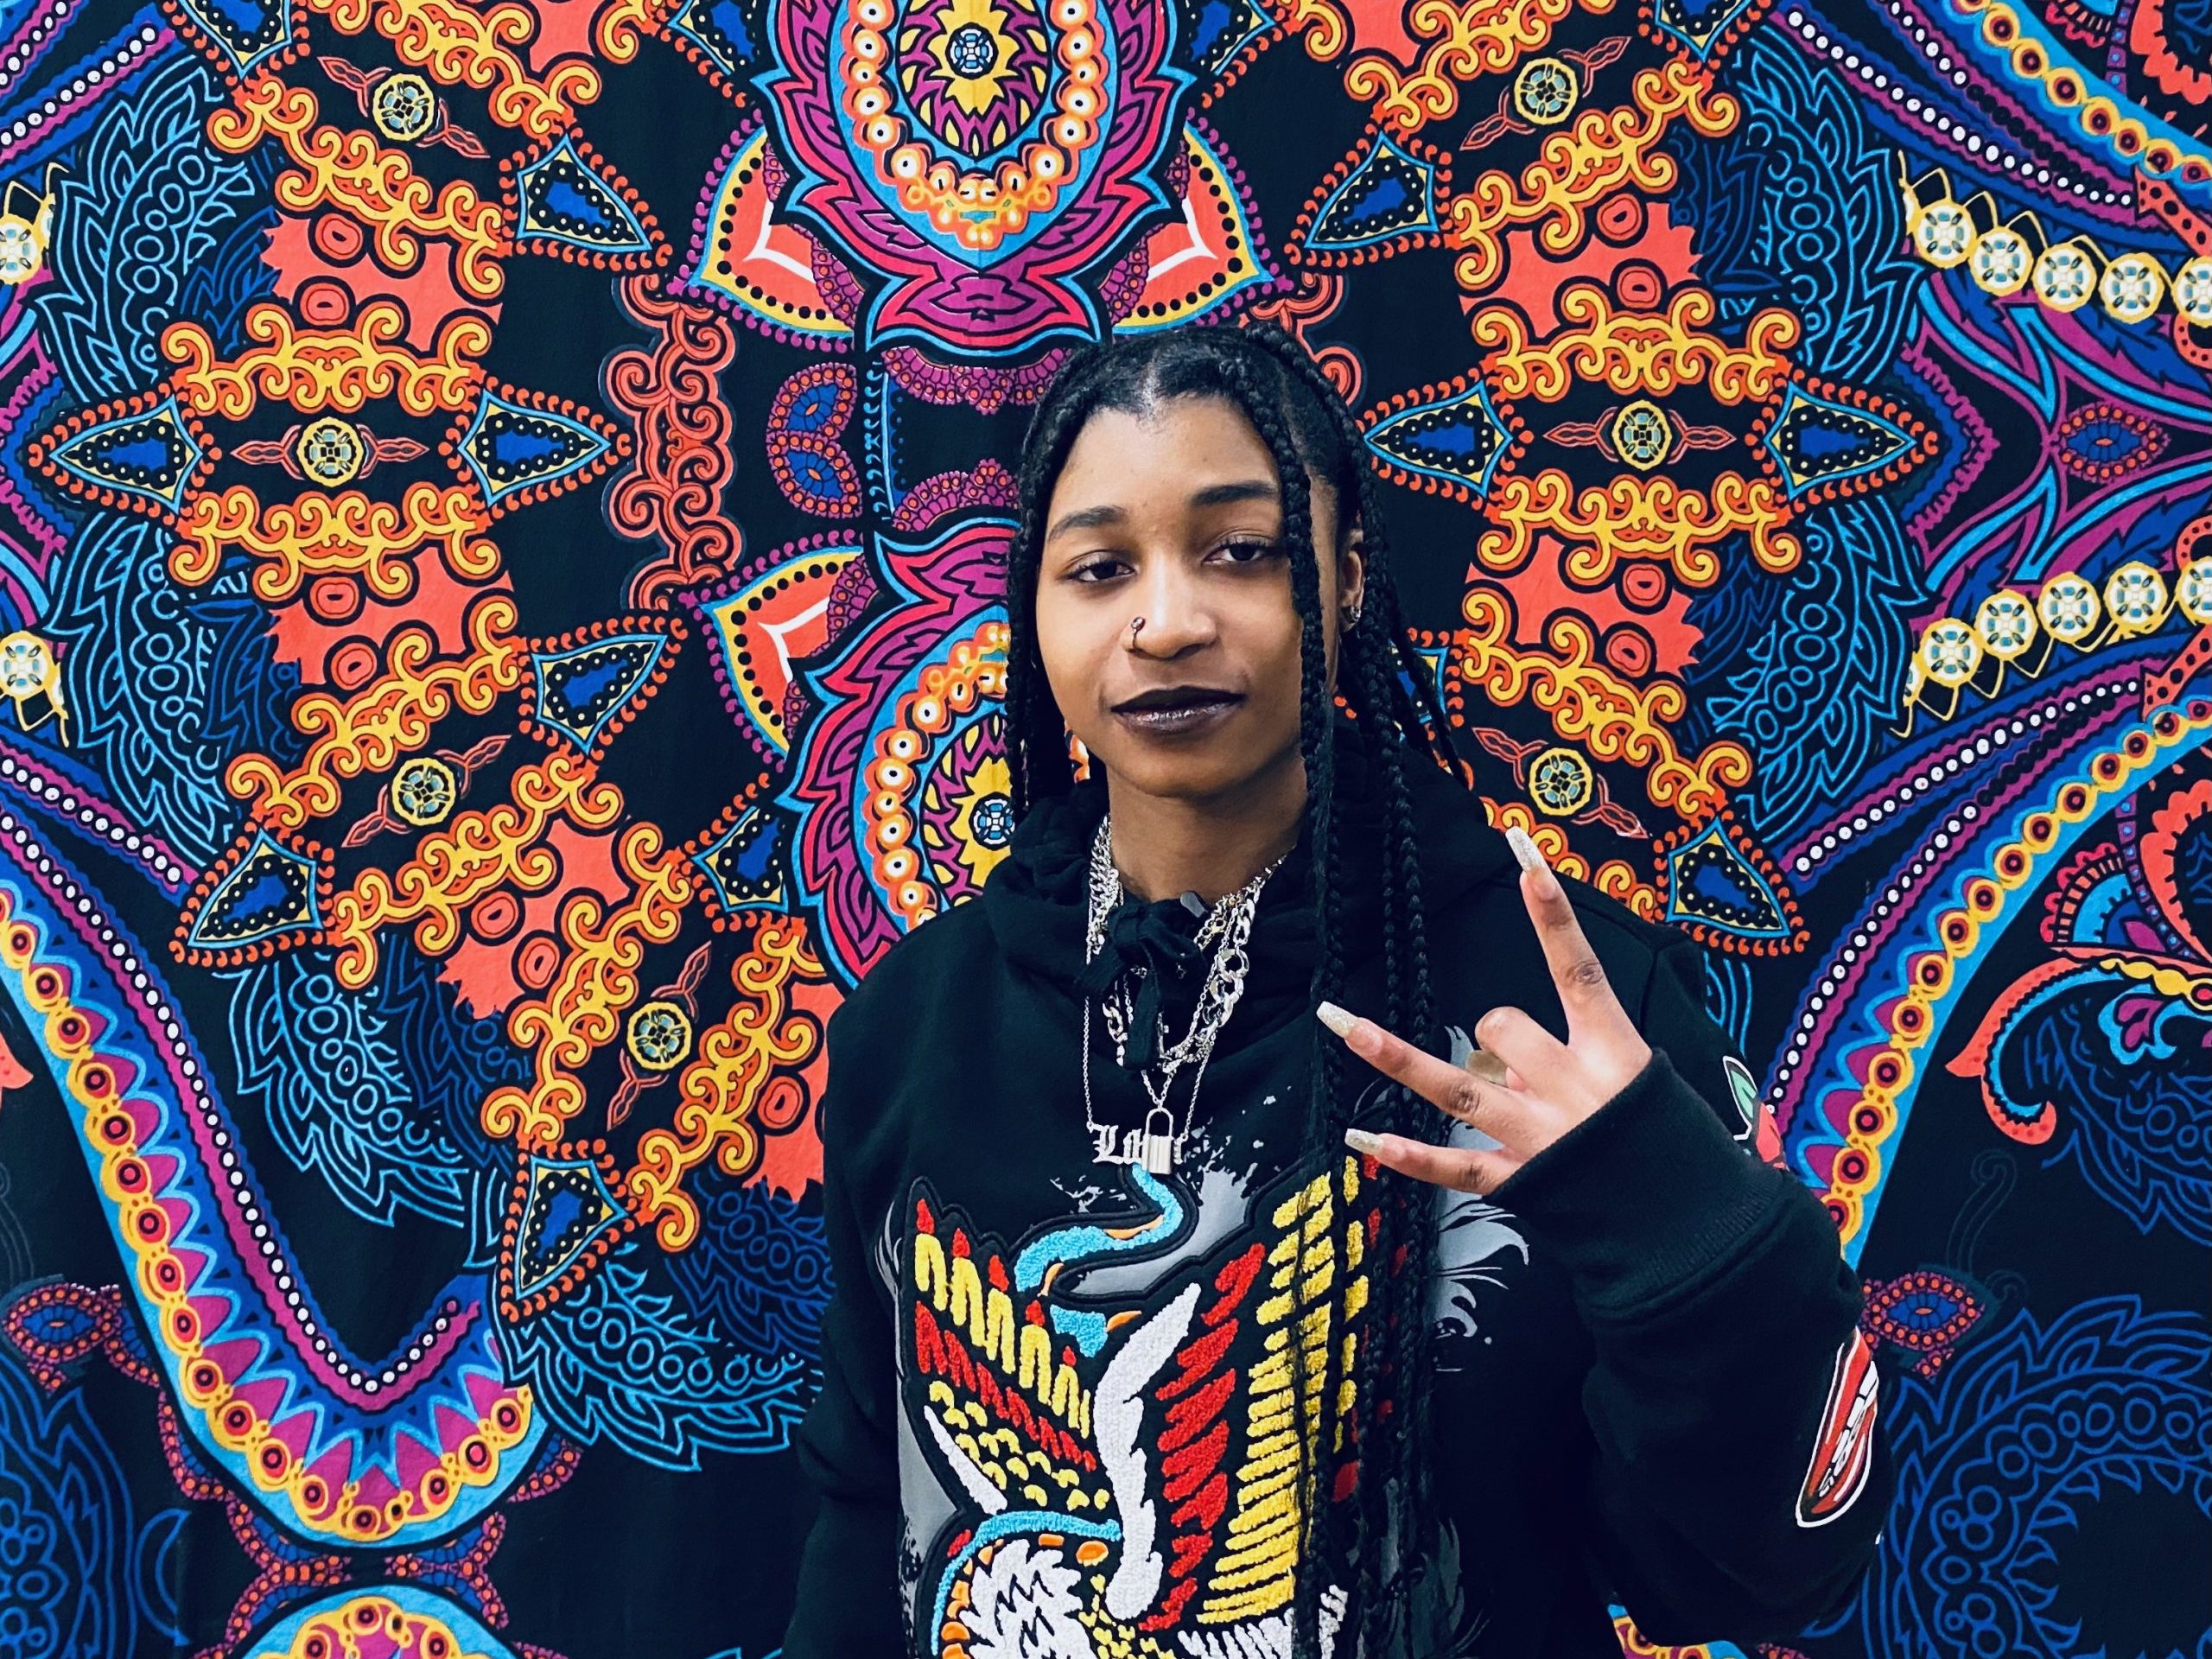 A young Black teen standing in front of a colorful mural